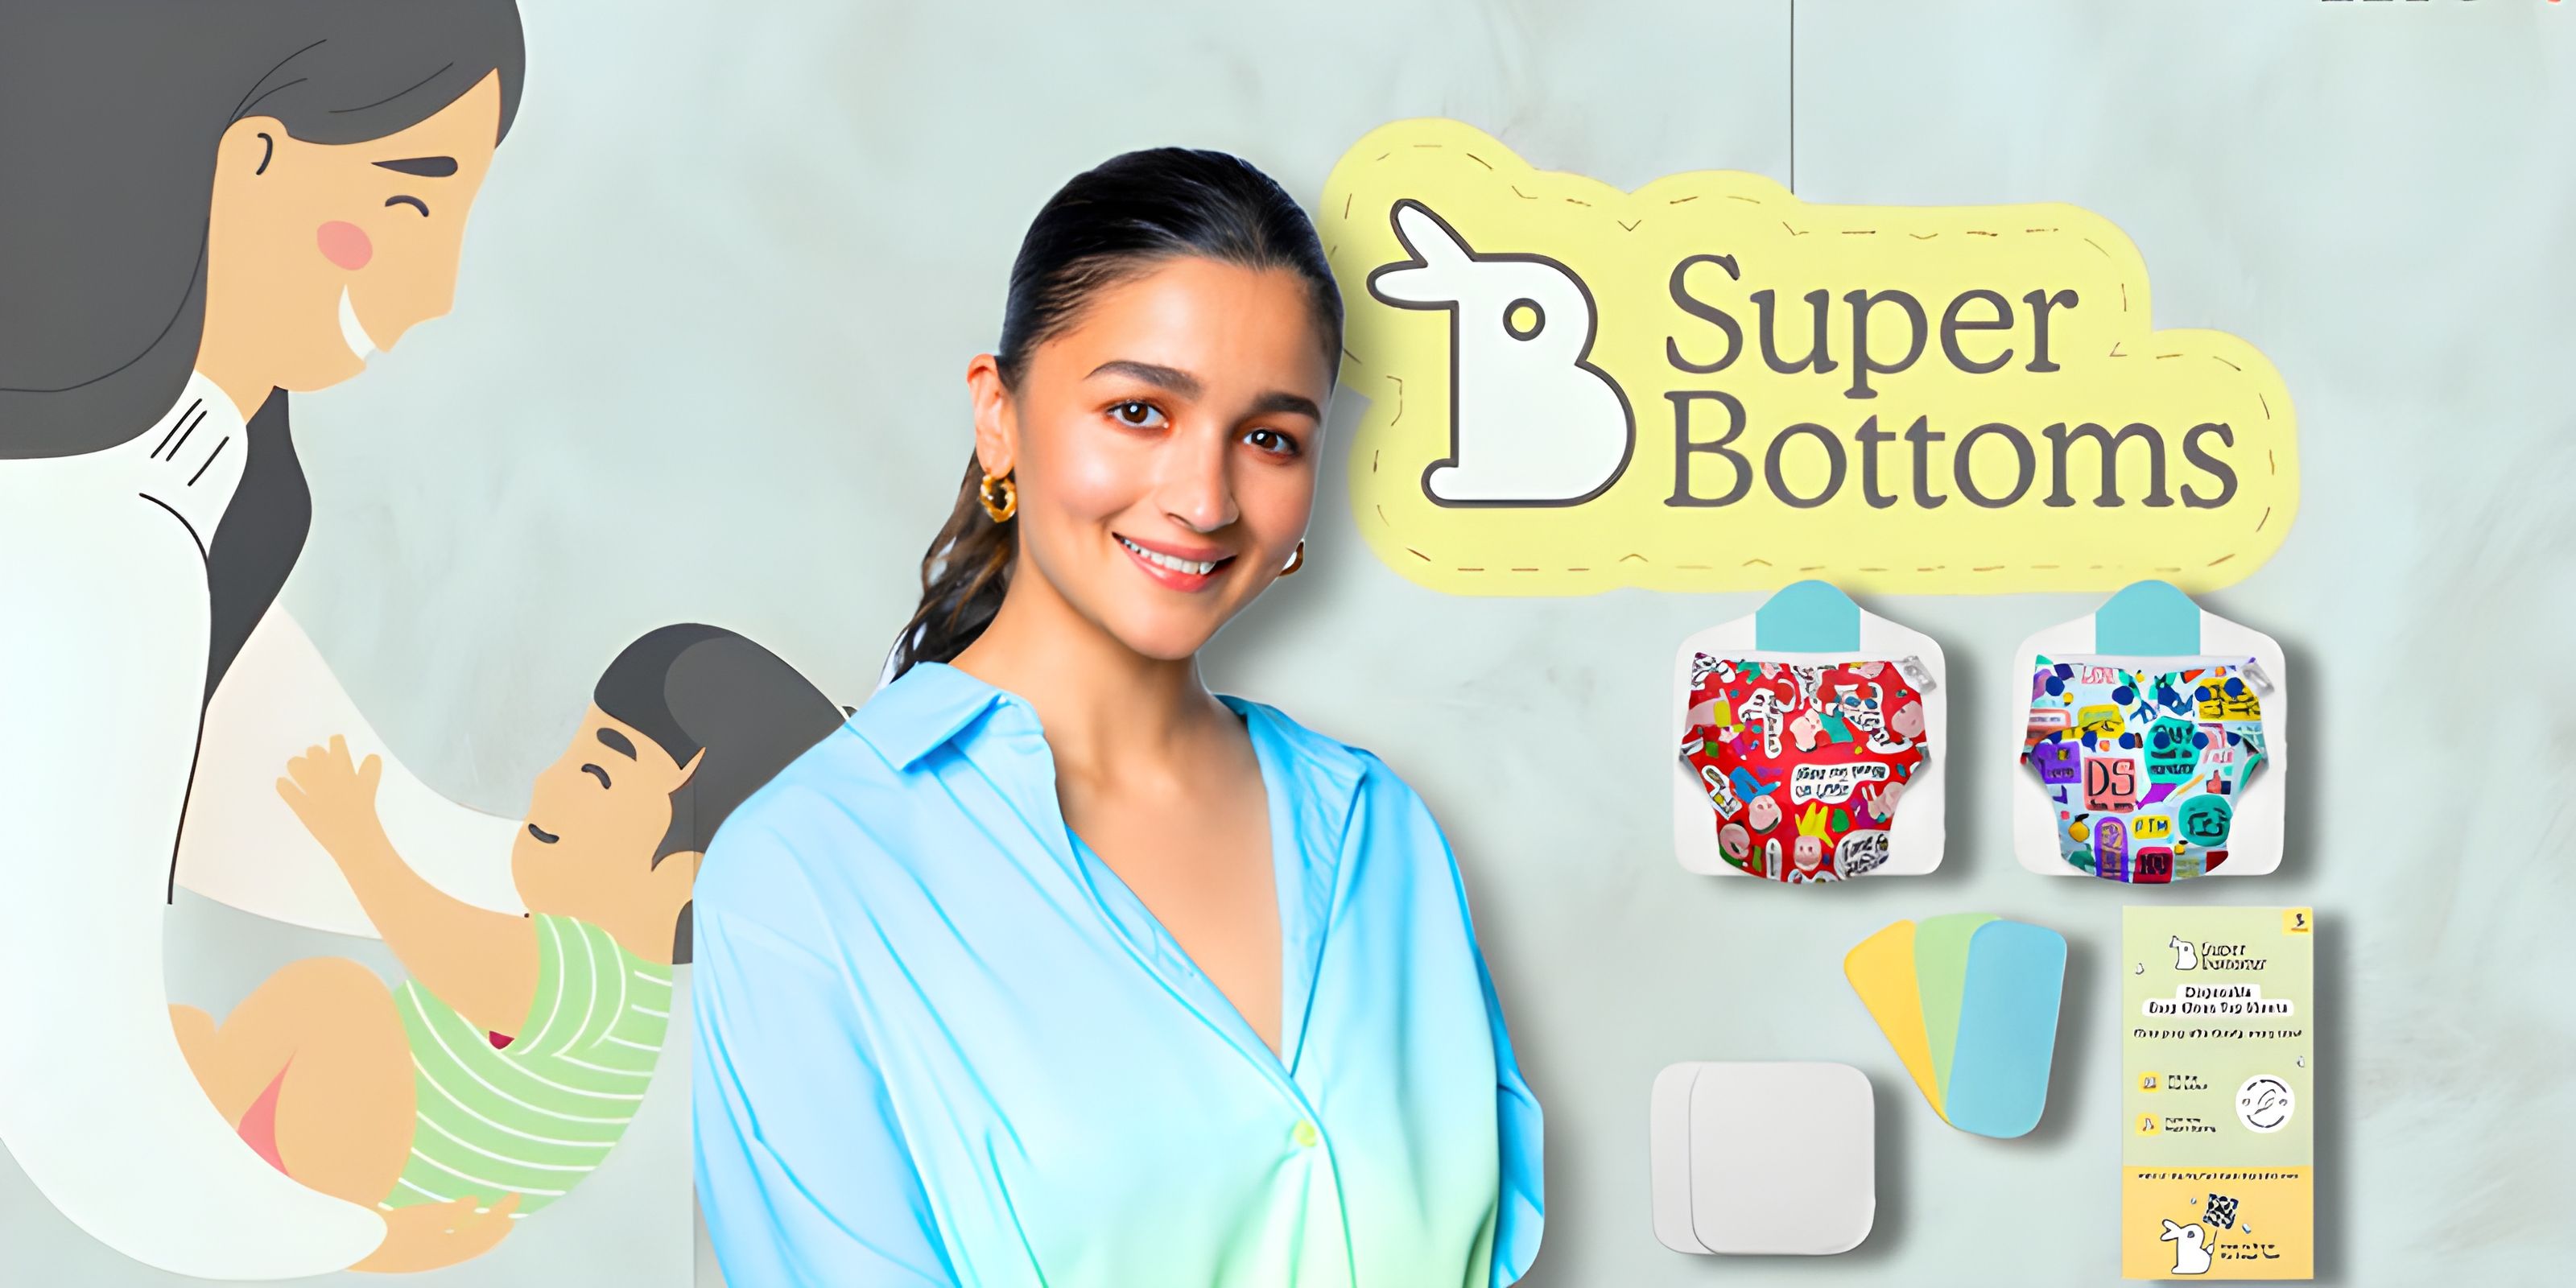 Alia Bhatt: New Investor and Ambassador for Eco-Friendly Baby Products SuperBottoms